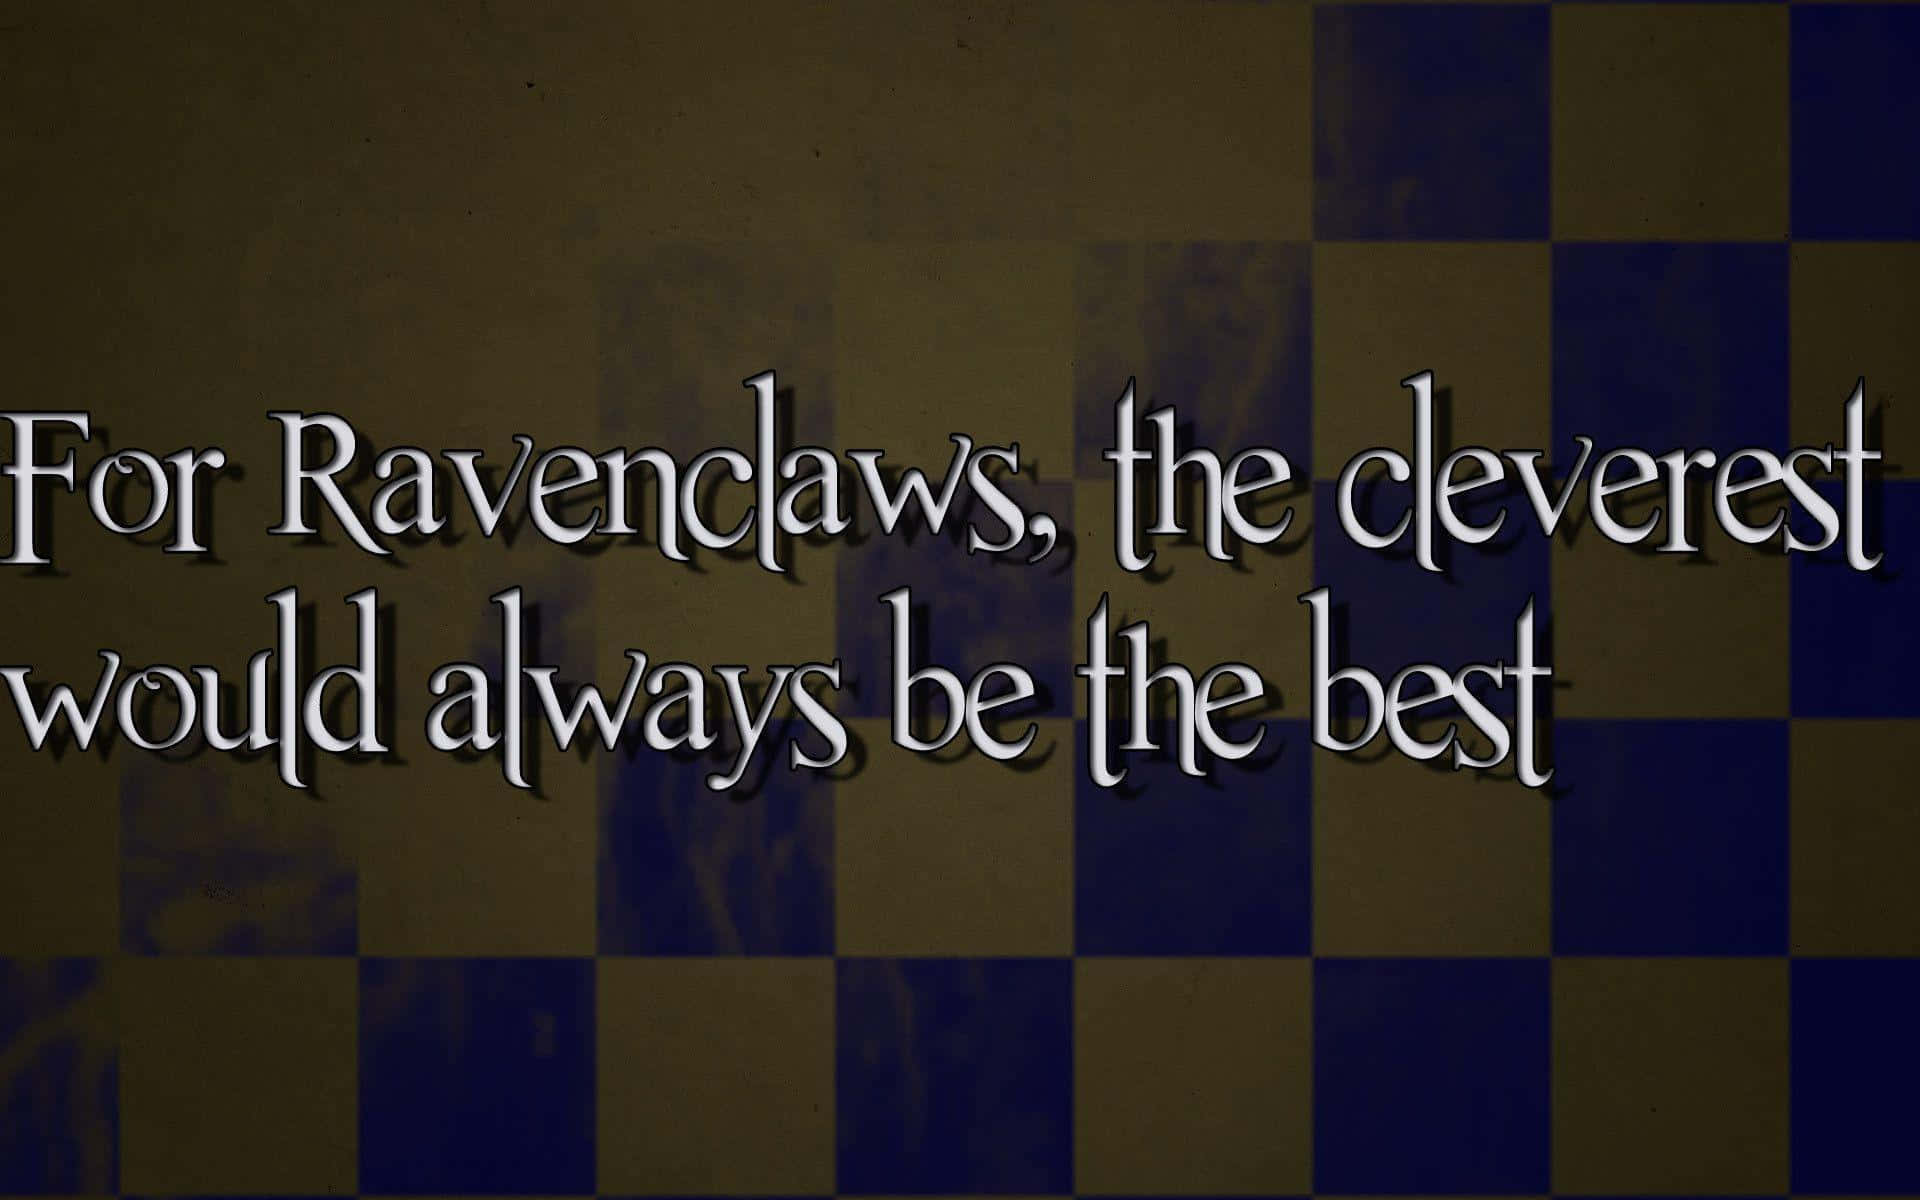 Representing the House of Ravenclaw in All Its Glory Wallpaper